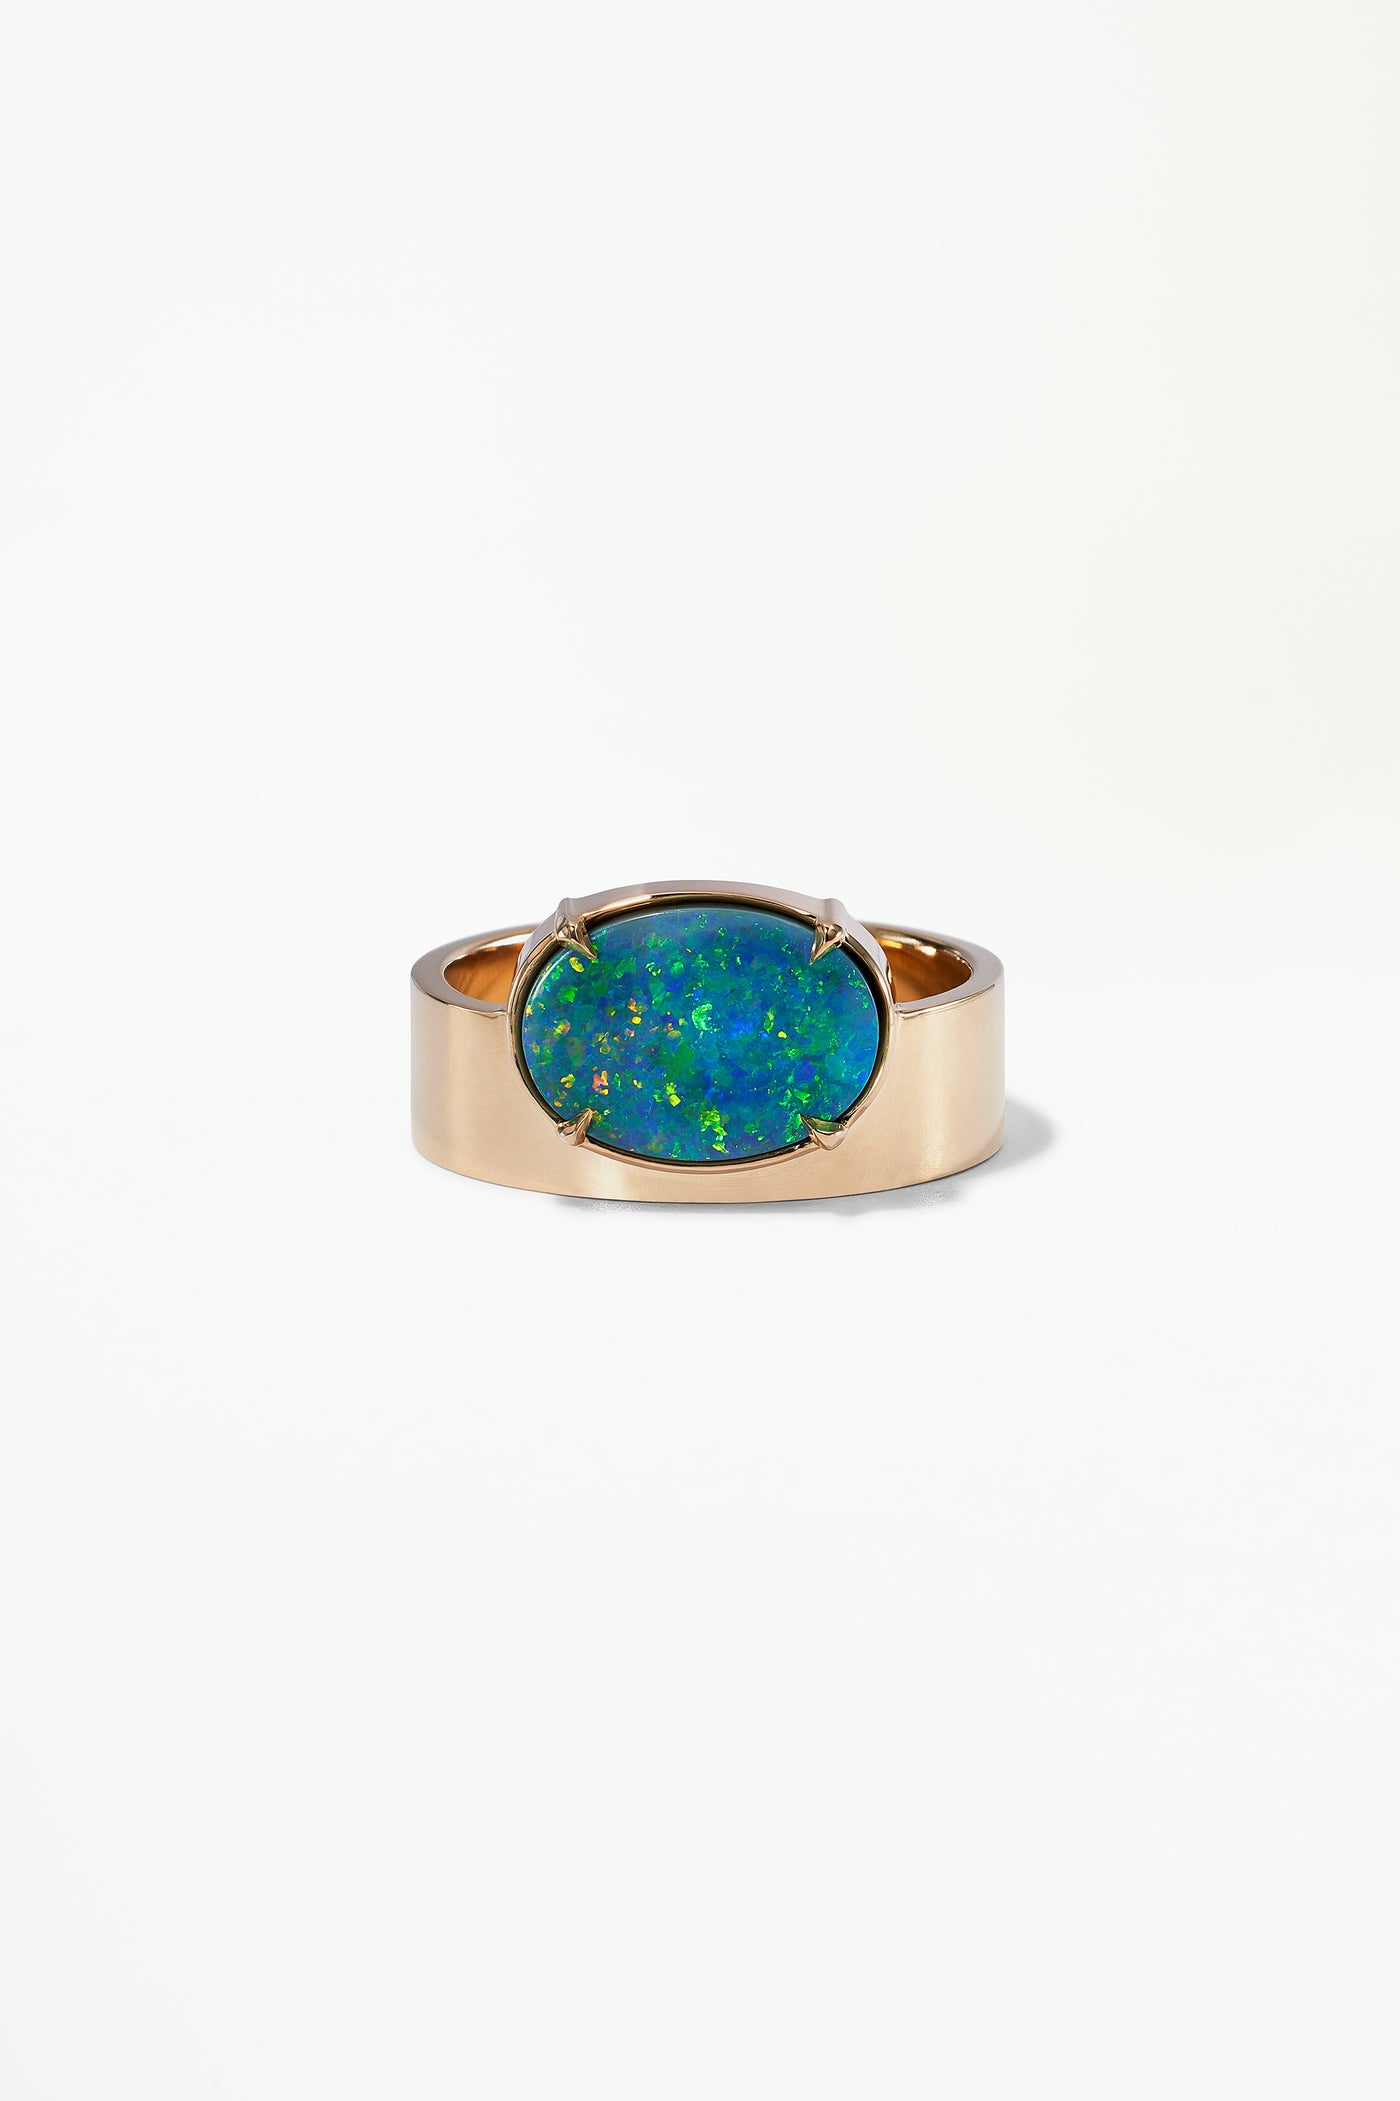 One of a Kind Black Opal Monolith Ring No. 17